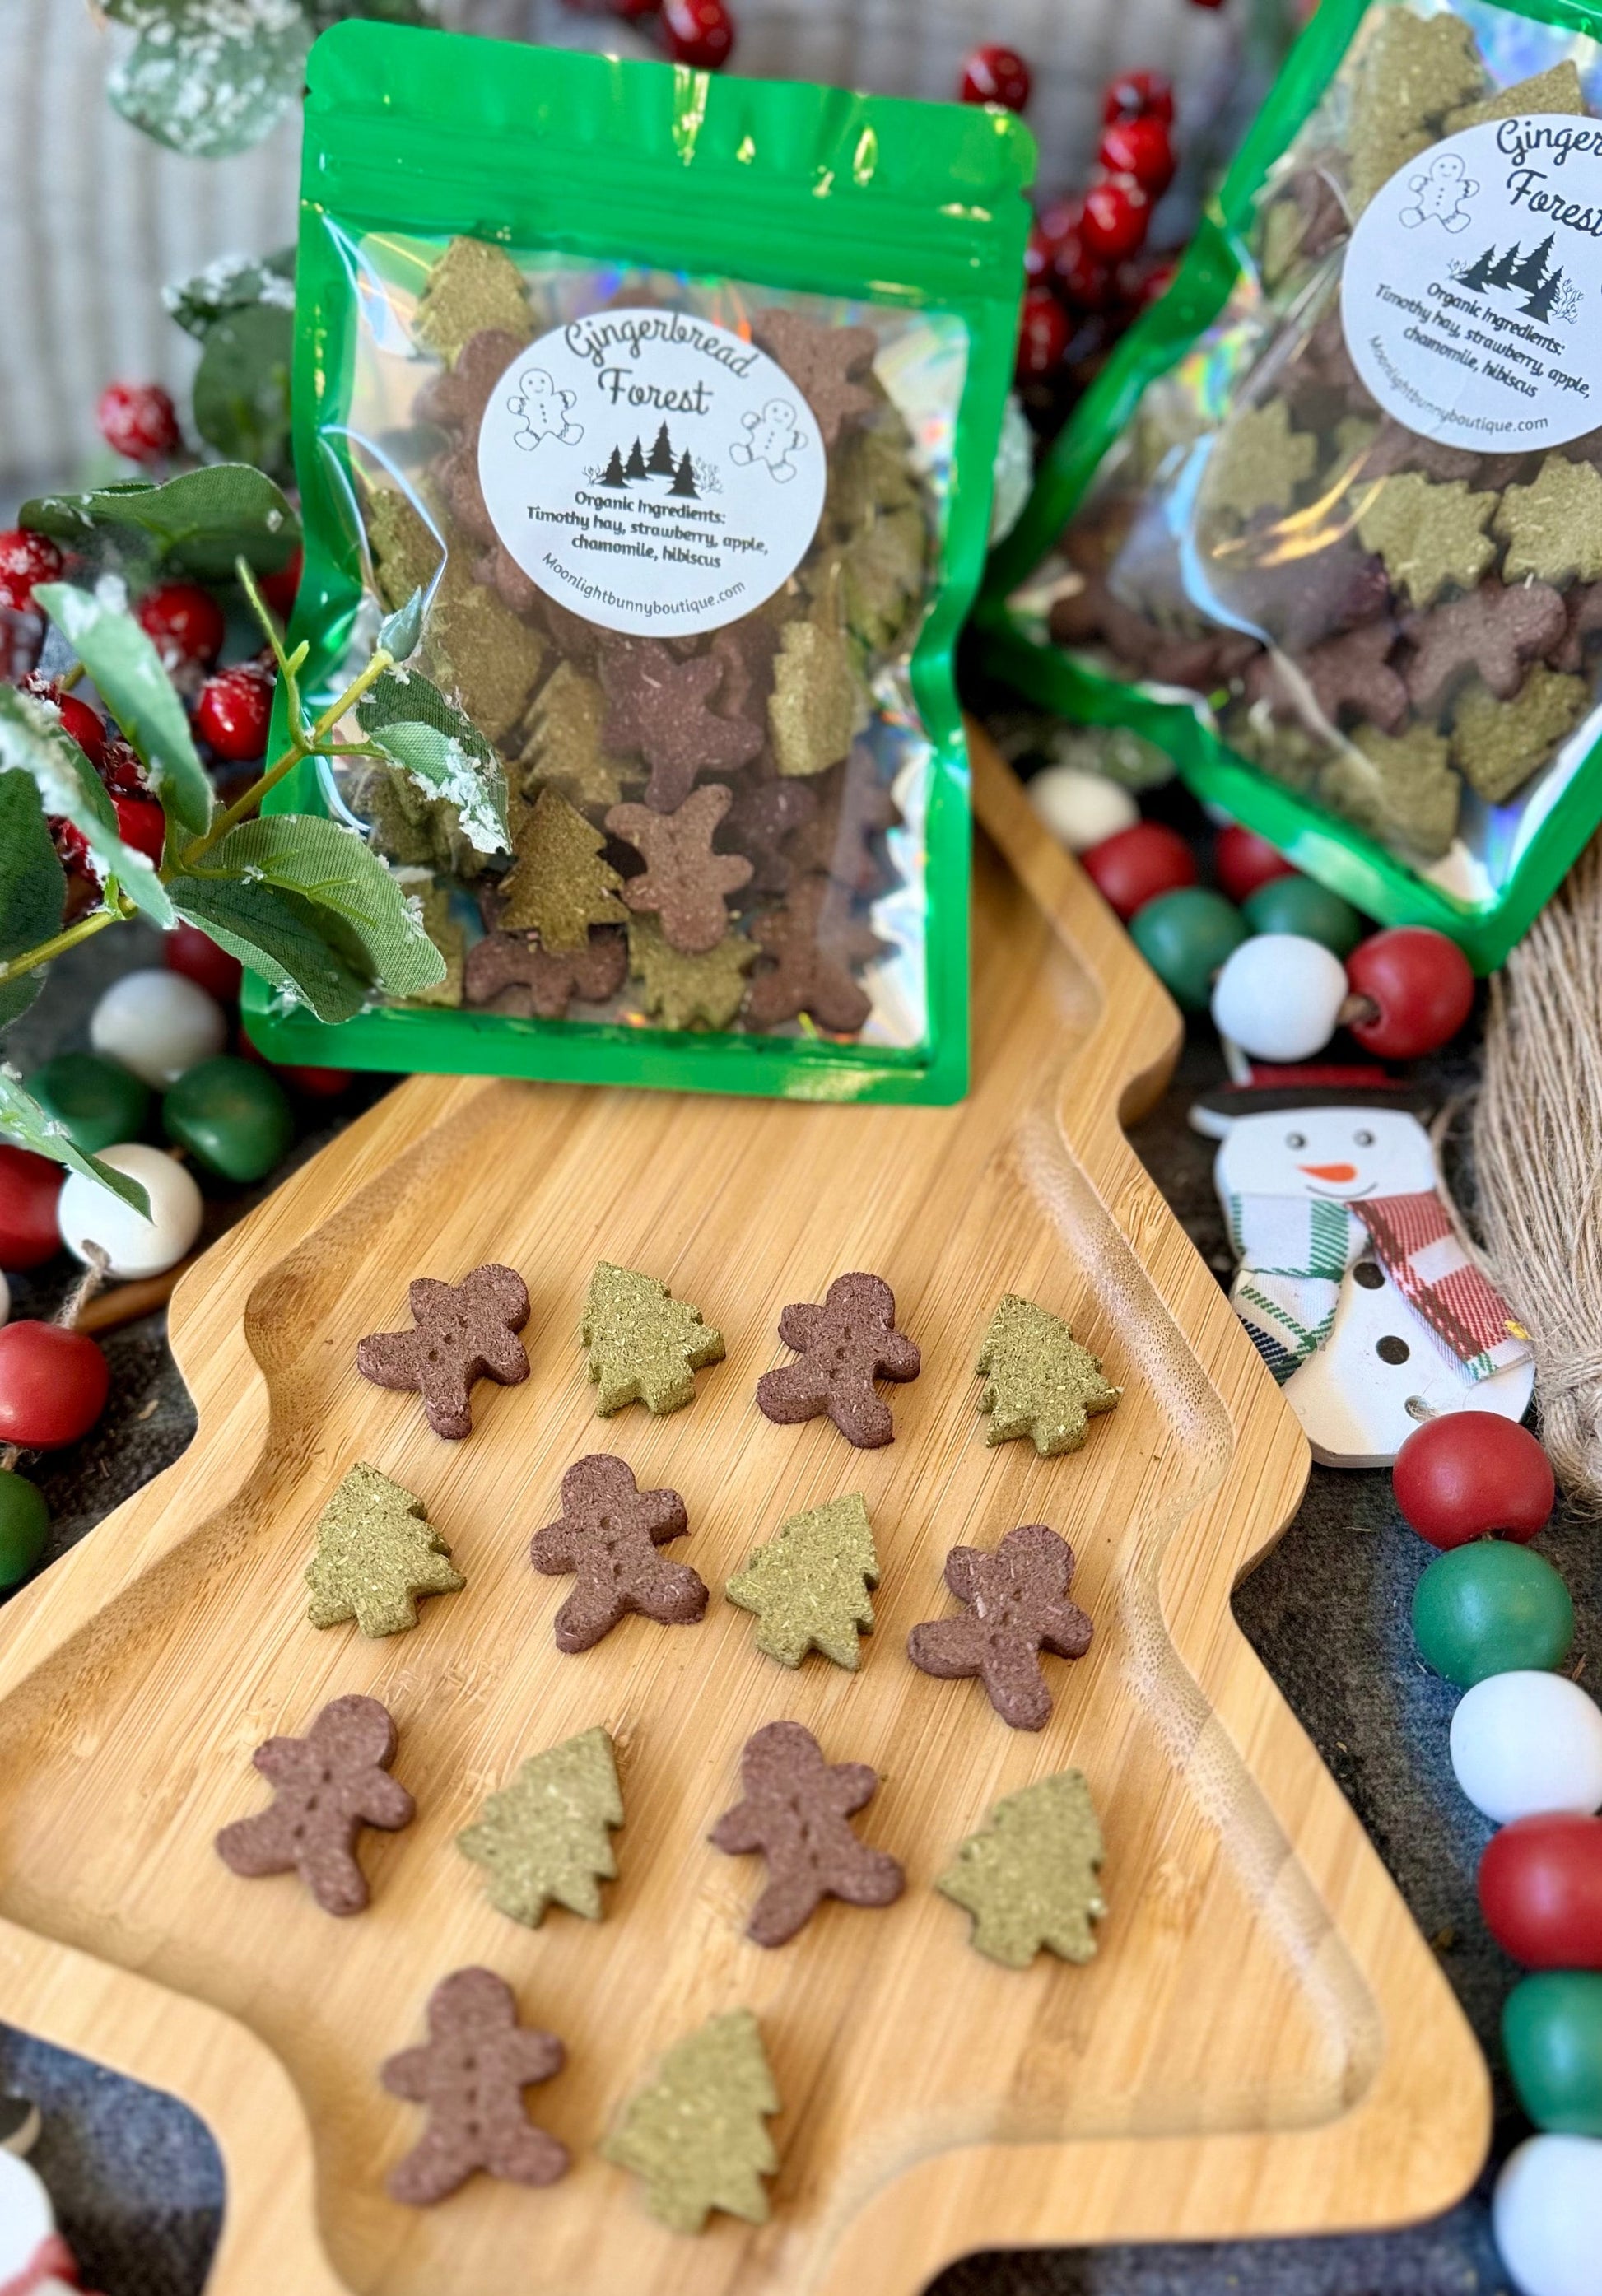 Gingerbread Forest~ Winter Inspired OAT FREE~Timothy Hay Based Treats, Crunchy snacks for Rabbits, & Small Pets, Healthy and Guilt Free